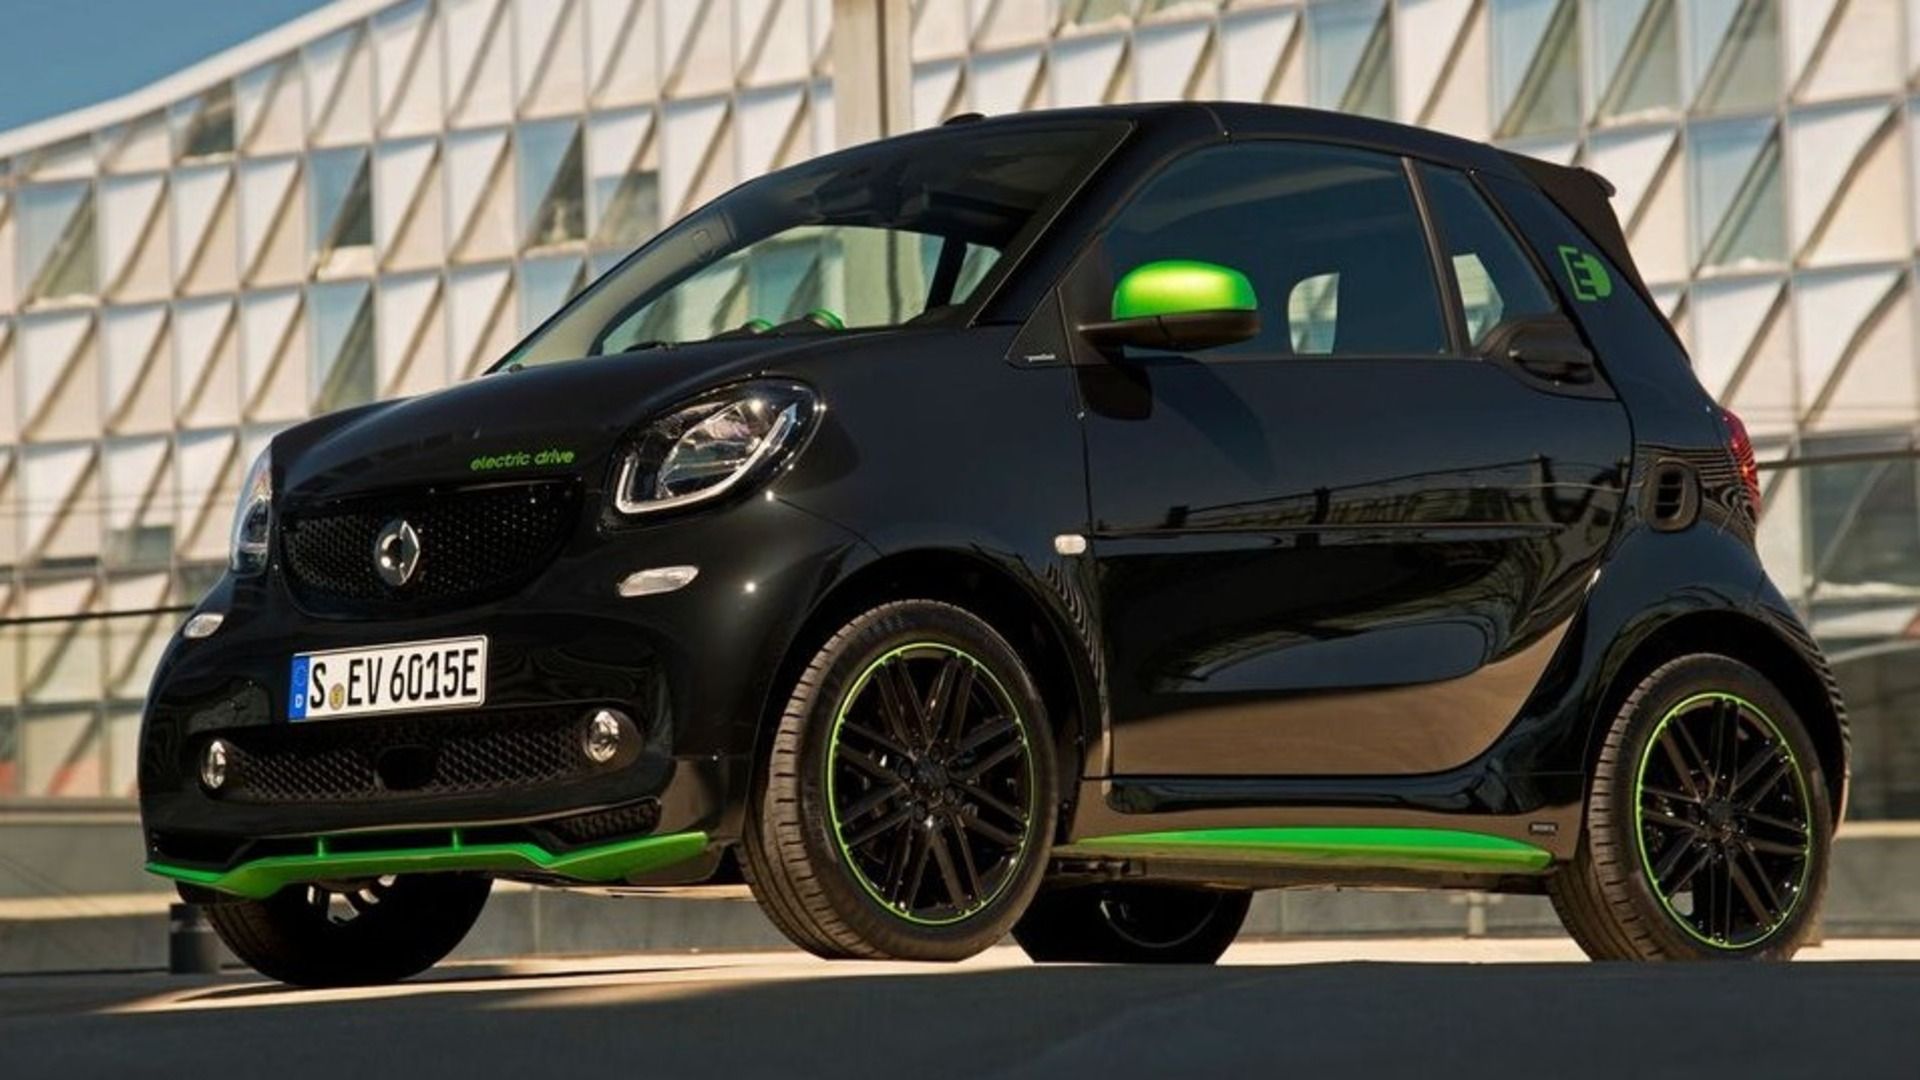 A Smart Fortwo ED in Electric Green and Gloss Black.